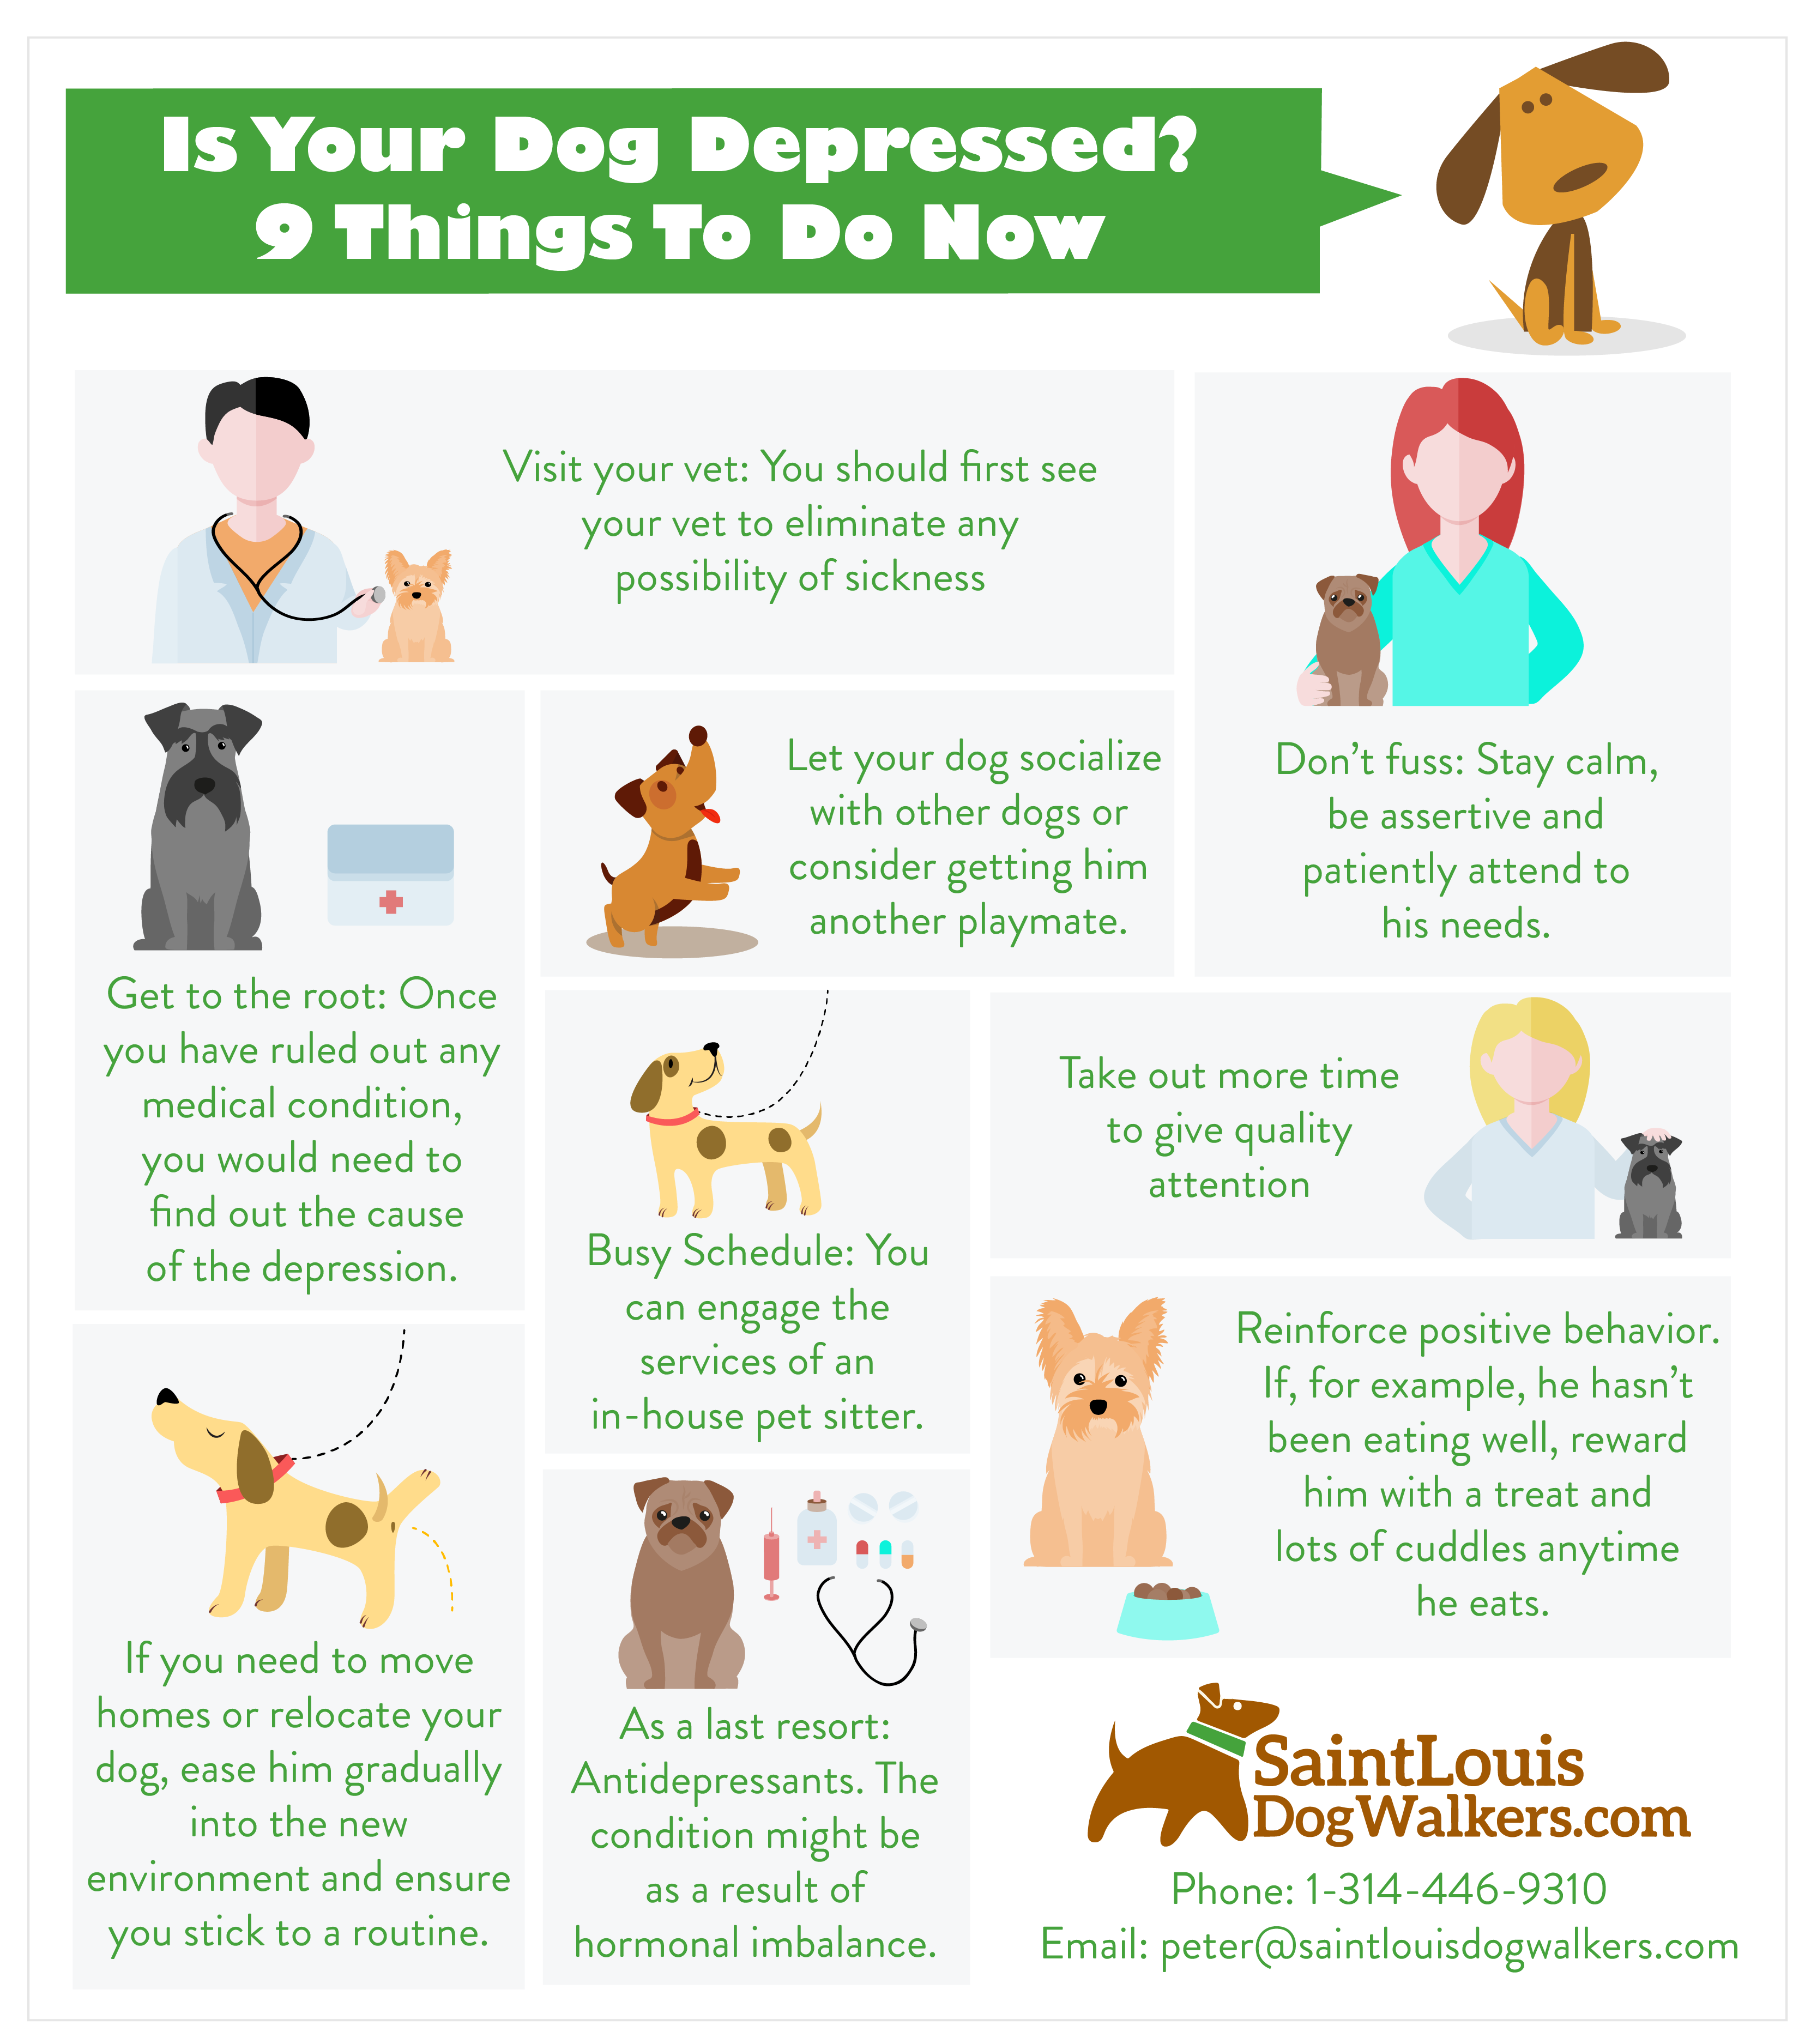 More About Pet Sitters Miami, Florida: Find Cat / Dog Sitting & Jobs